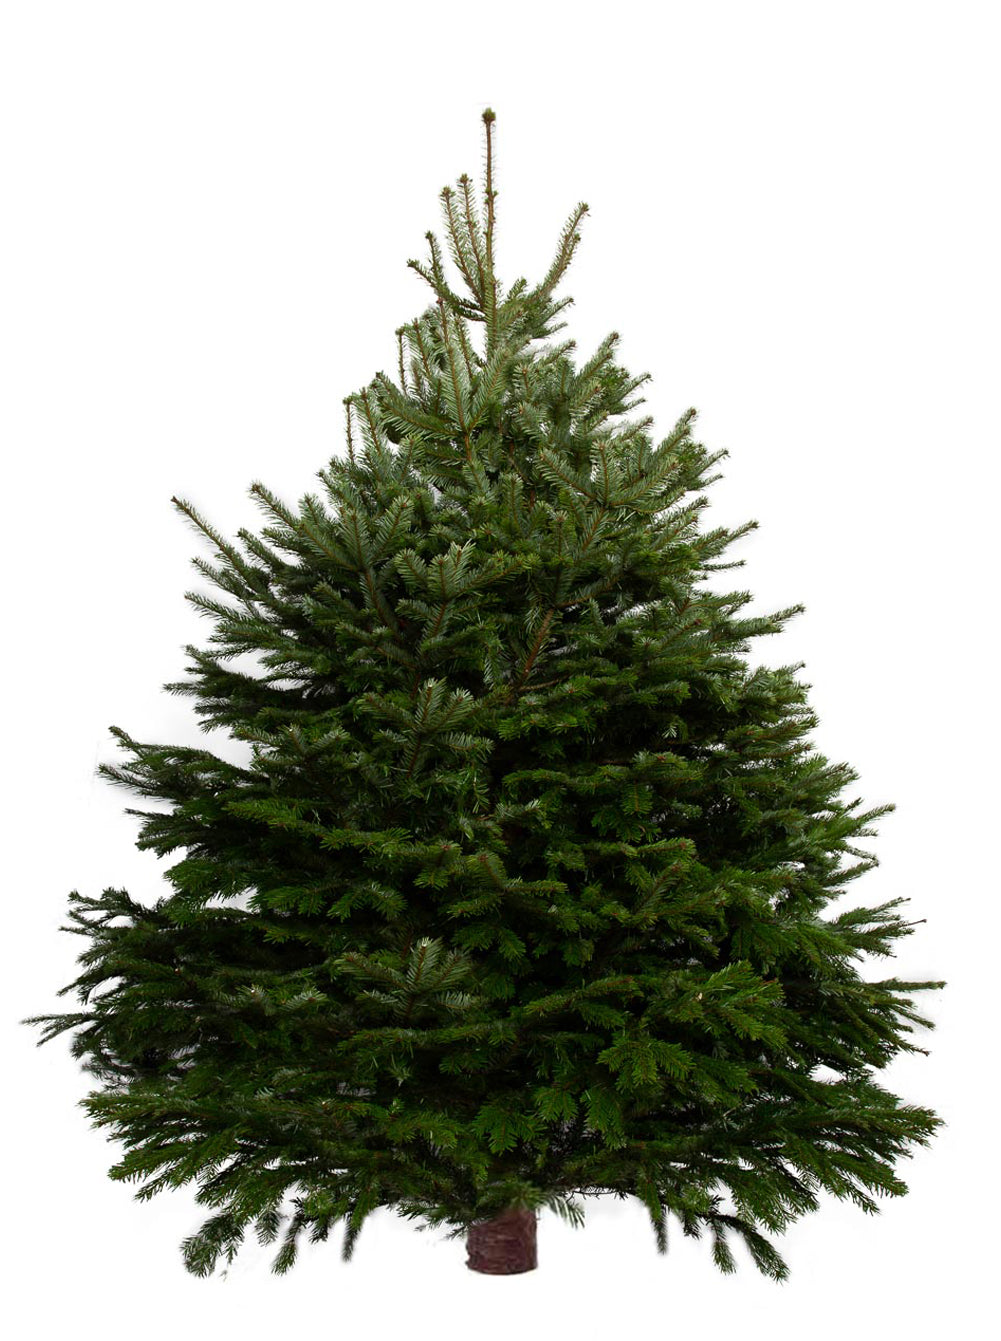 10ft Nordmann Fir Christmas Tree from Pines and Needles